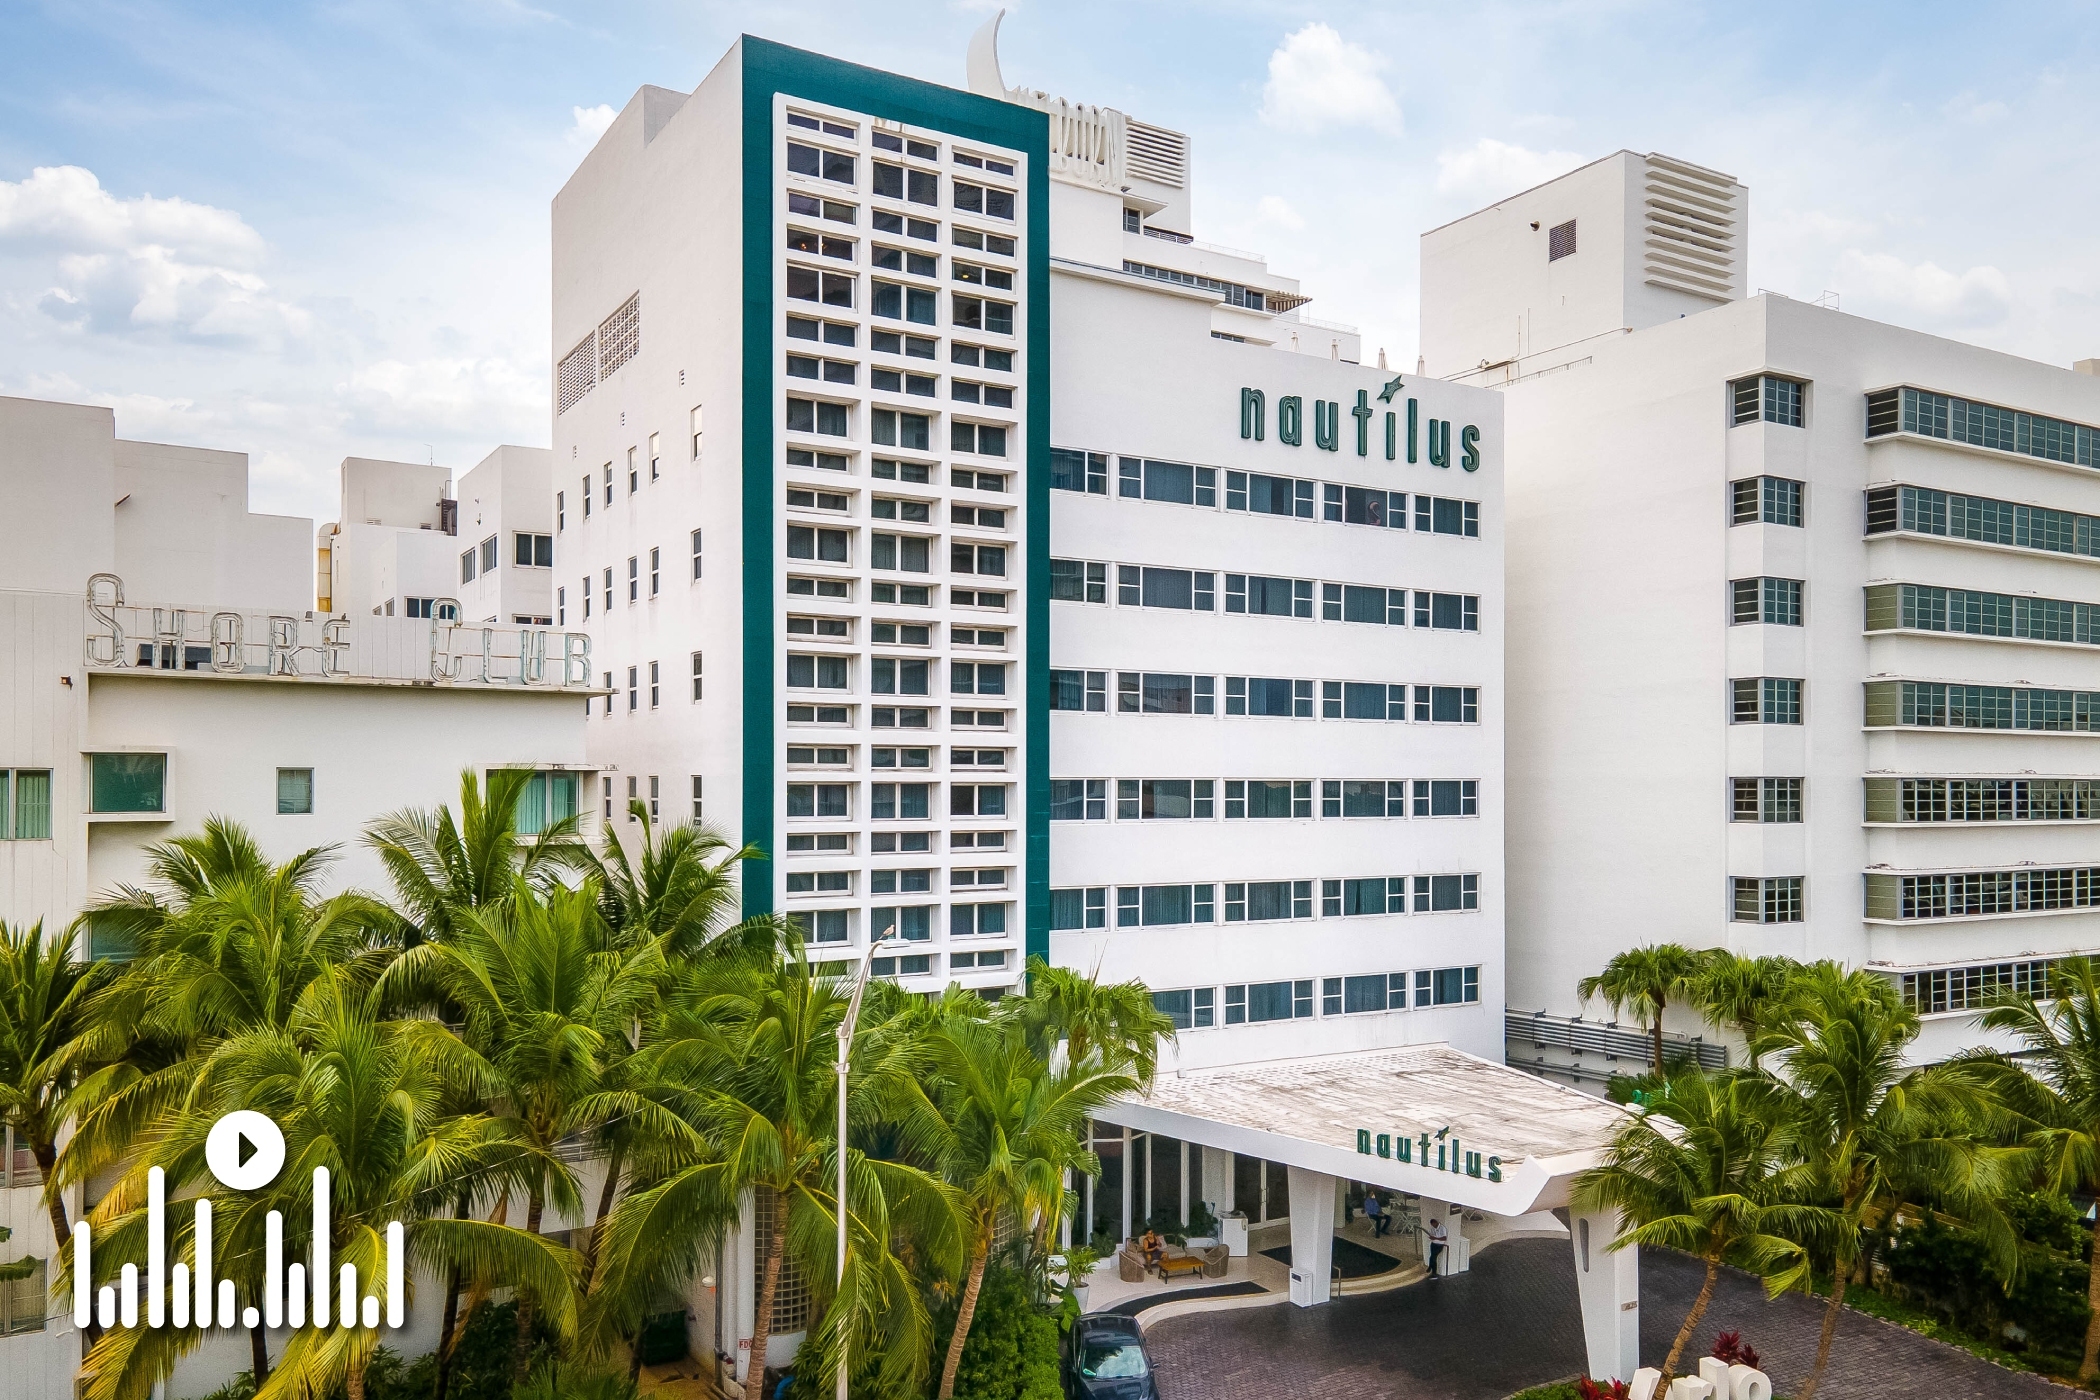 Why Sonestas Keith Pierce Thinks His Company Is Poised for Growth featured image, showing The Nautilus in Miami, one of the newest additions to Sonesta Hotels International's portfolio